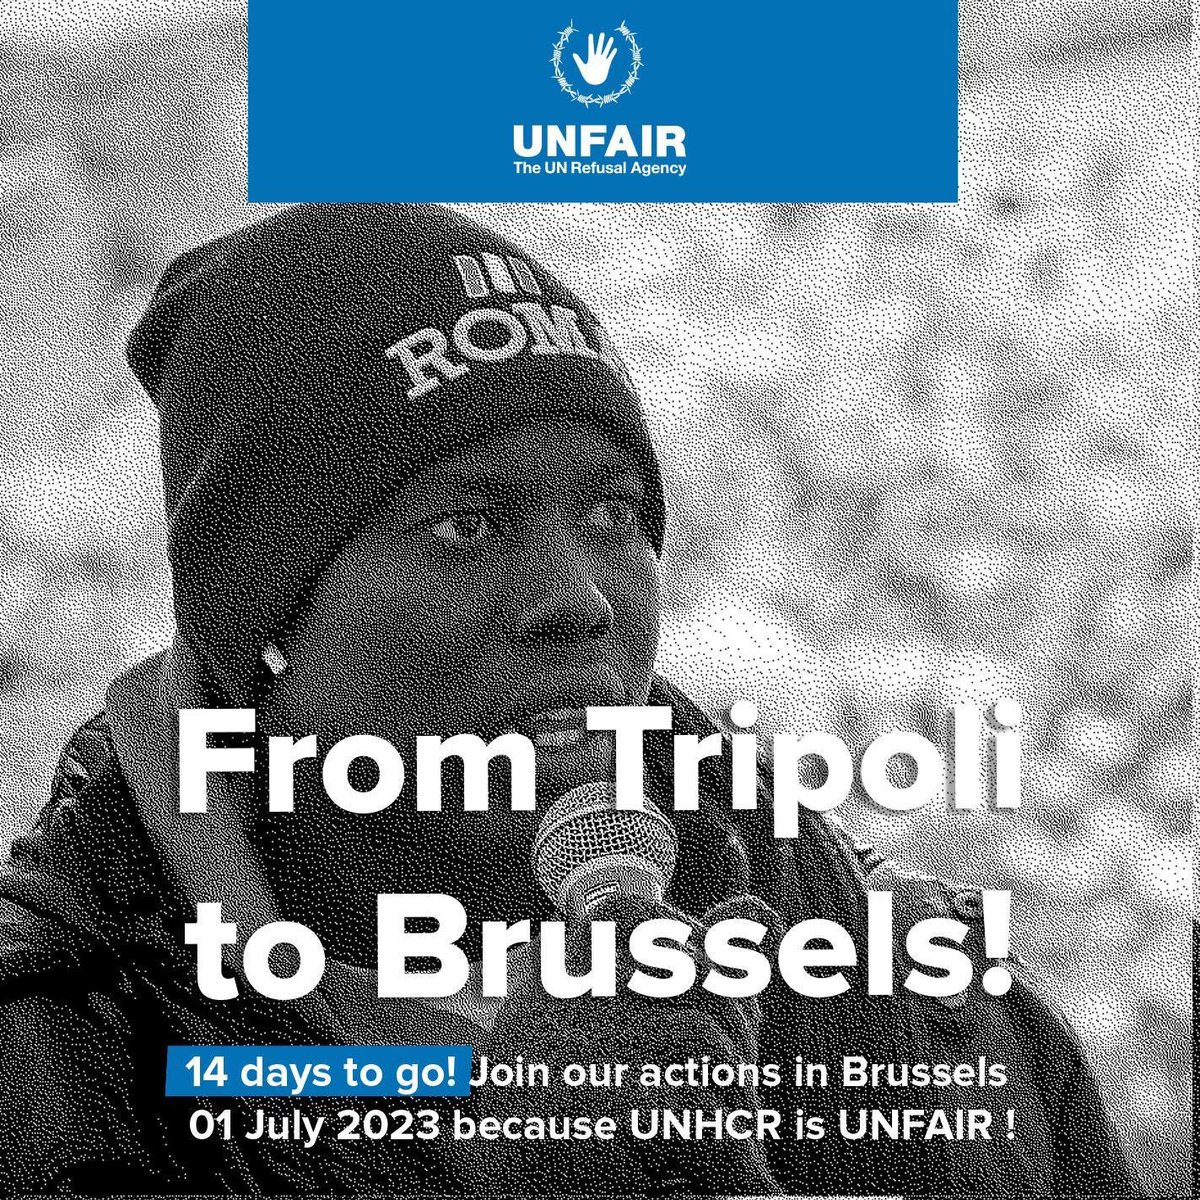 Call to actions: 
14 days to go ✊🏾

We are coming to Bruxelles 

We are Angry 

We are Tired 

We are Desperate 

We are Heartbroken 

WE WANT ANSWERS. 

We are coming to tear down the walls of walls of the hypothetical politicians in Bruxelles, we are coming to make noise right…